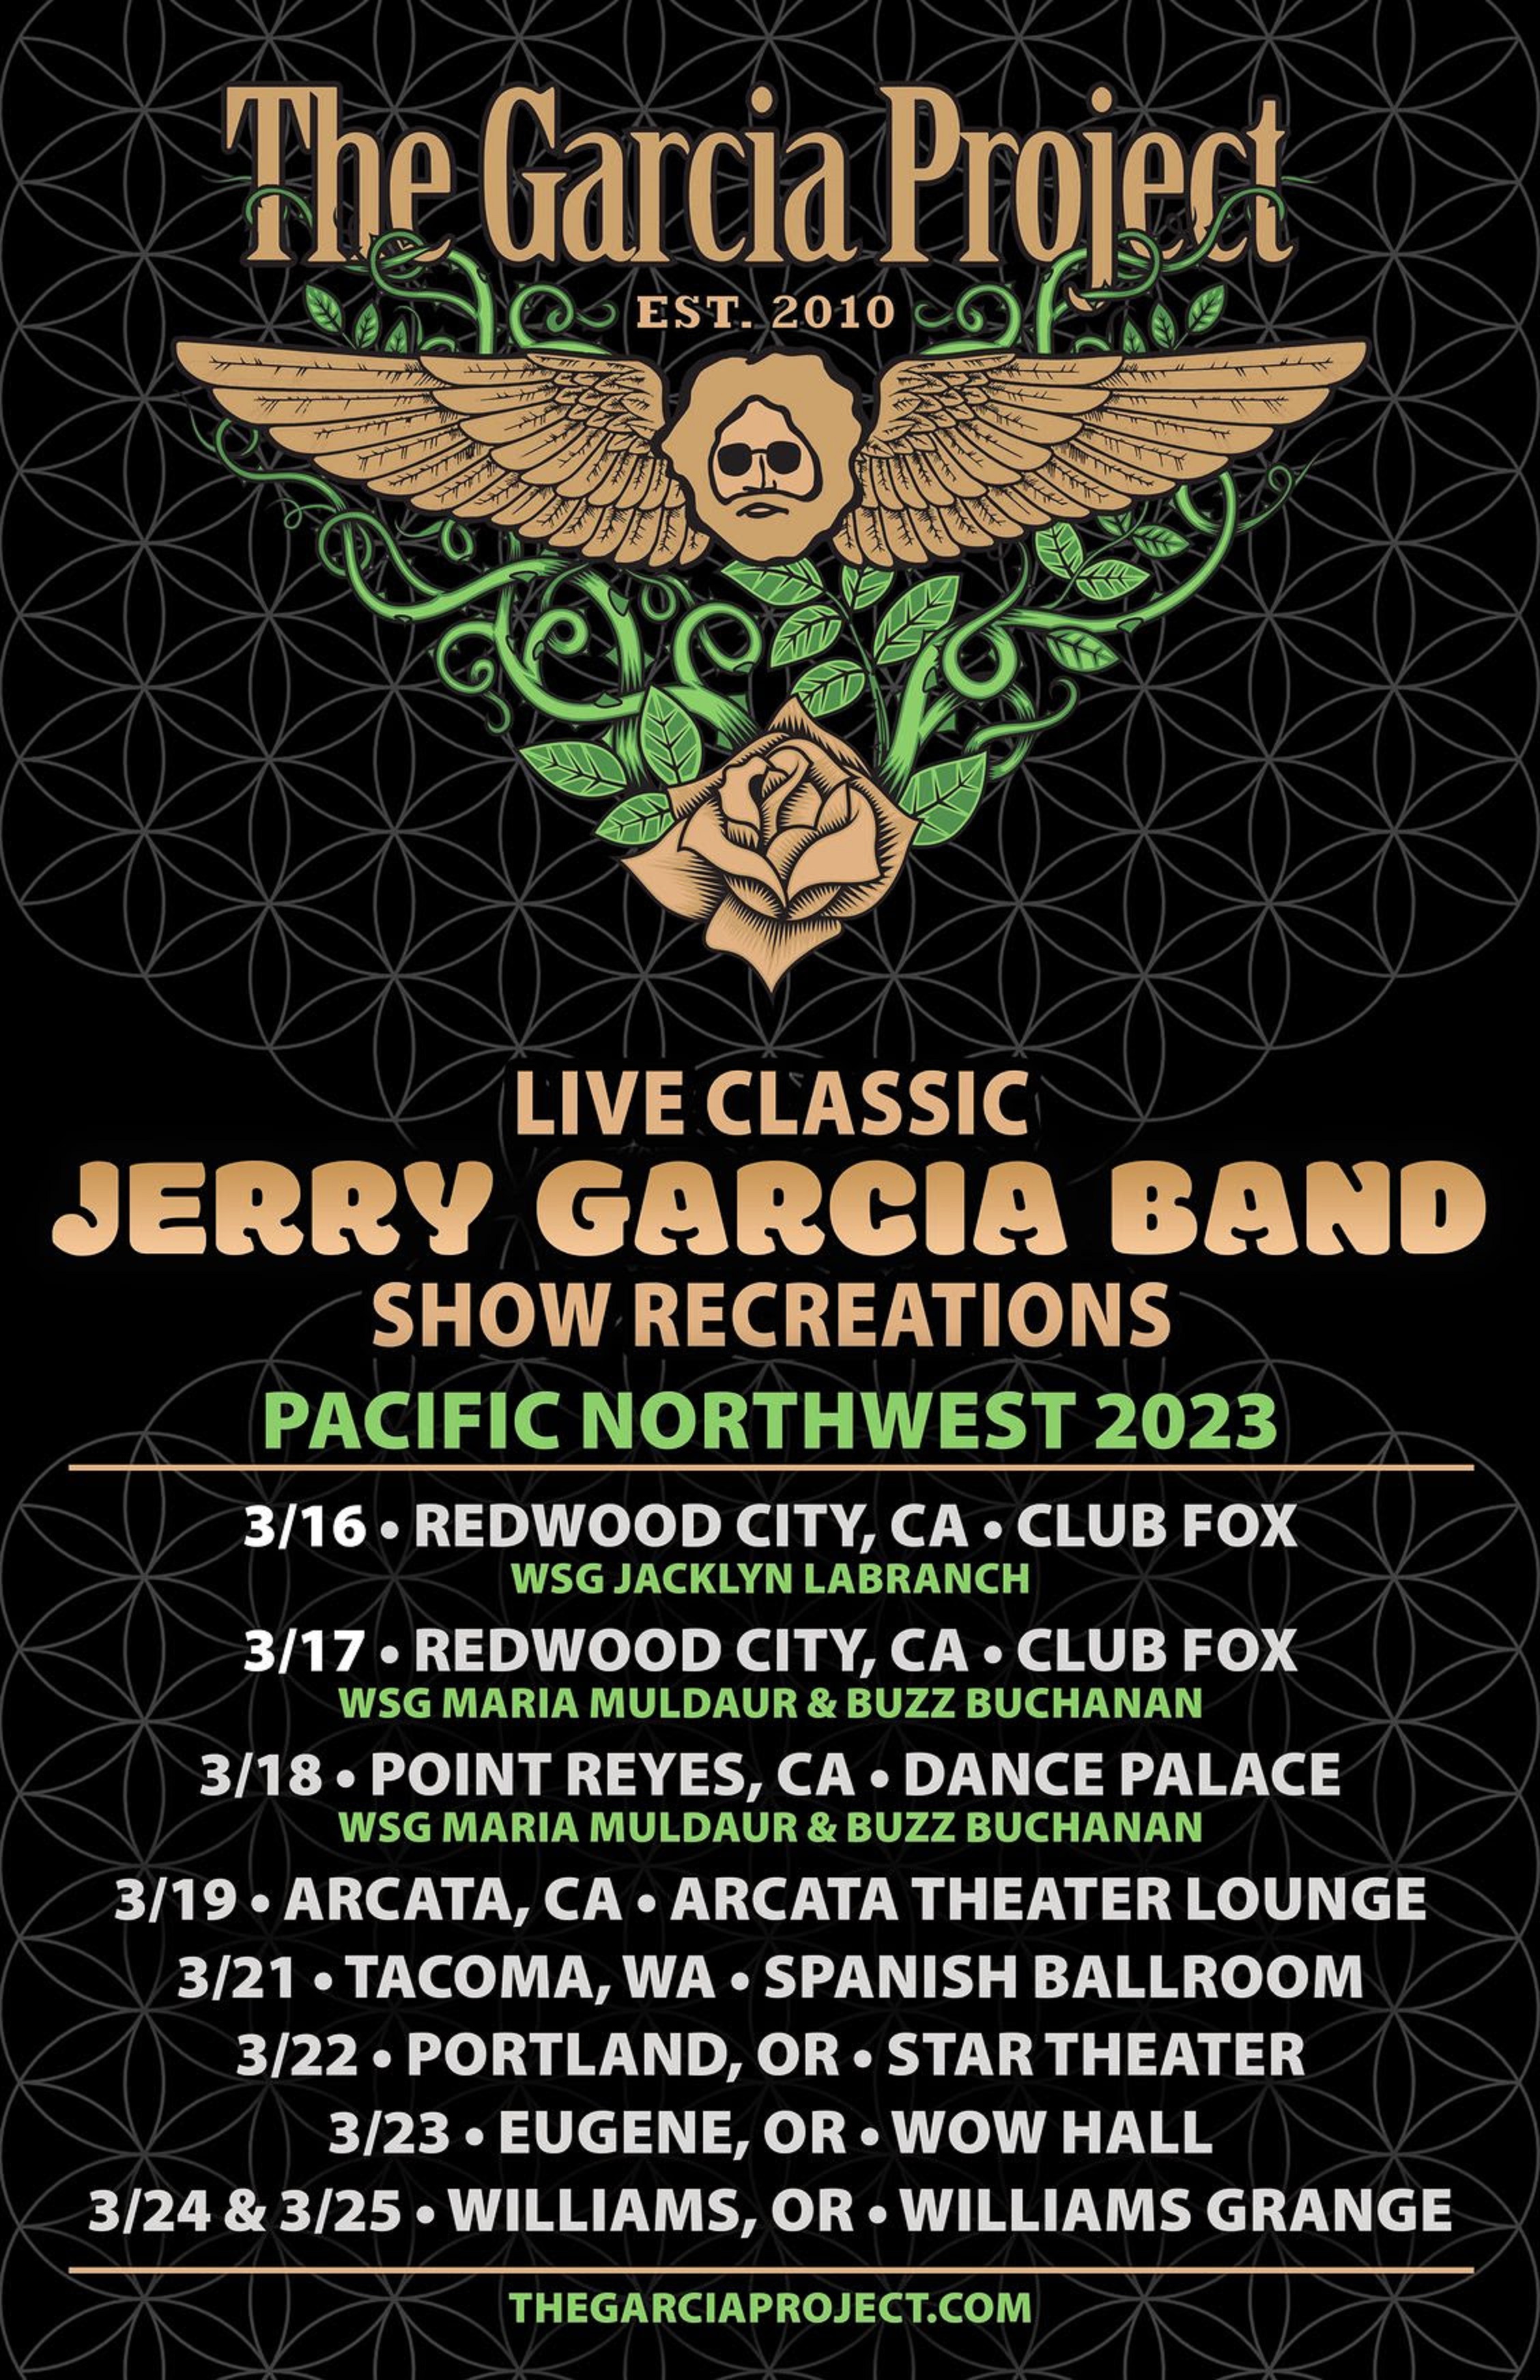 The Garcia Project heads back out on tour